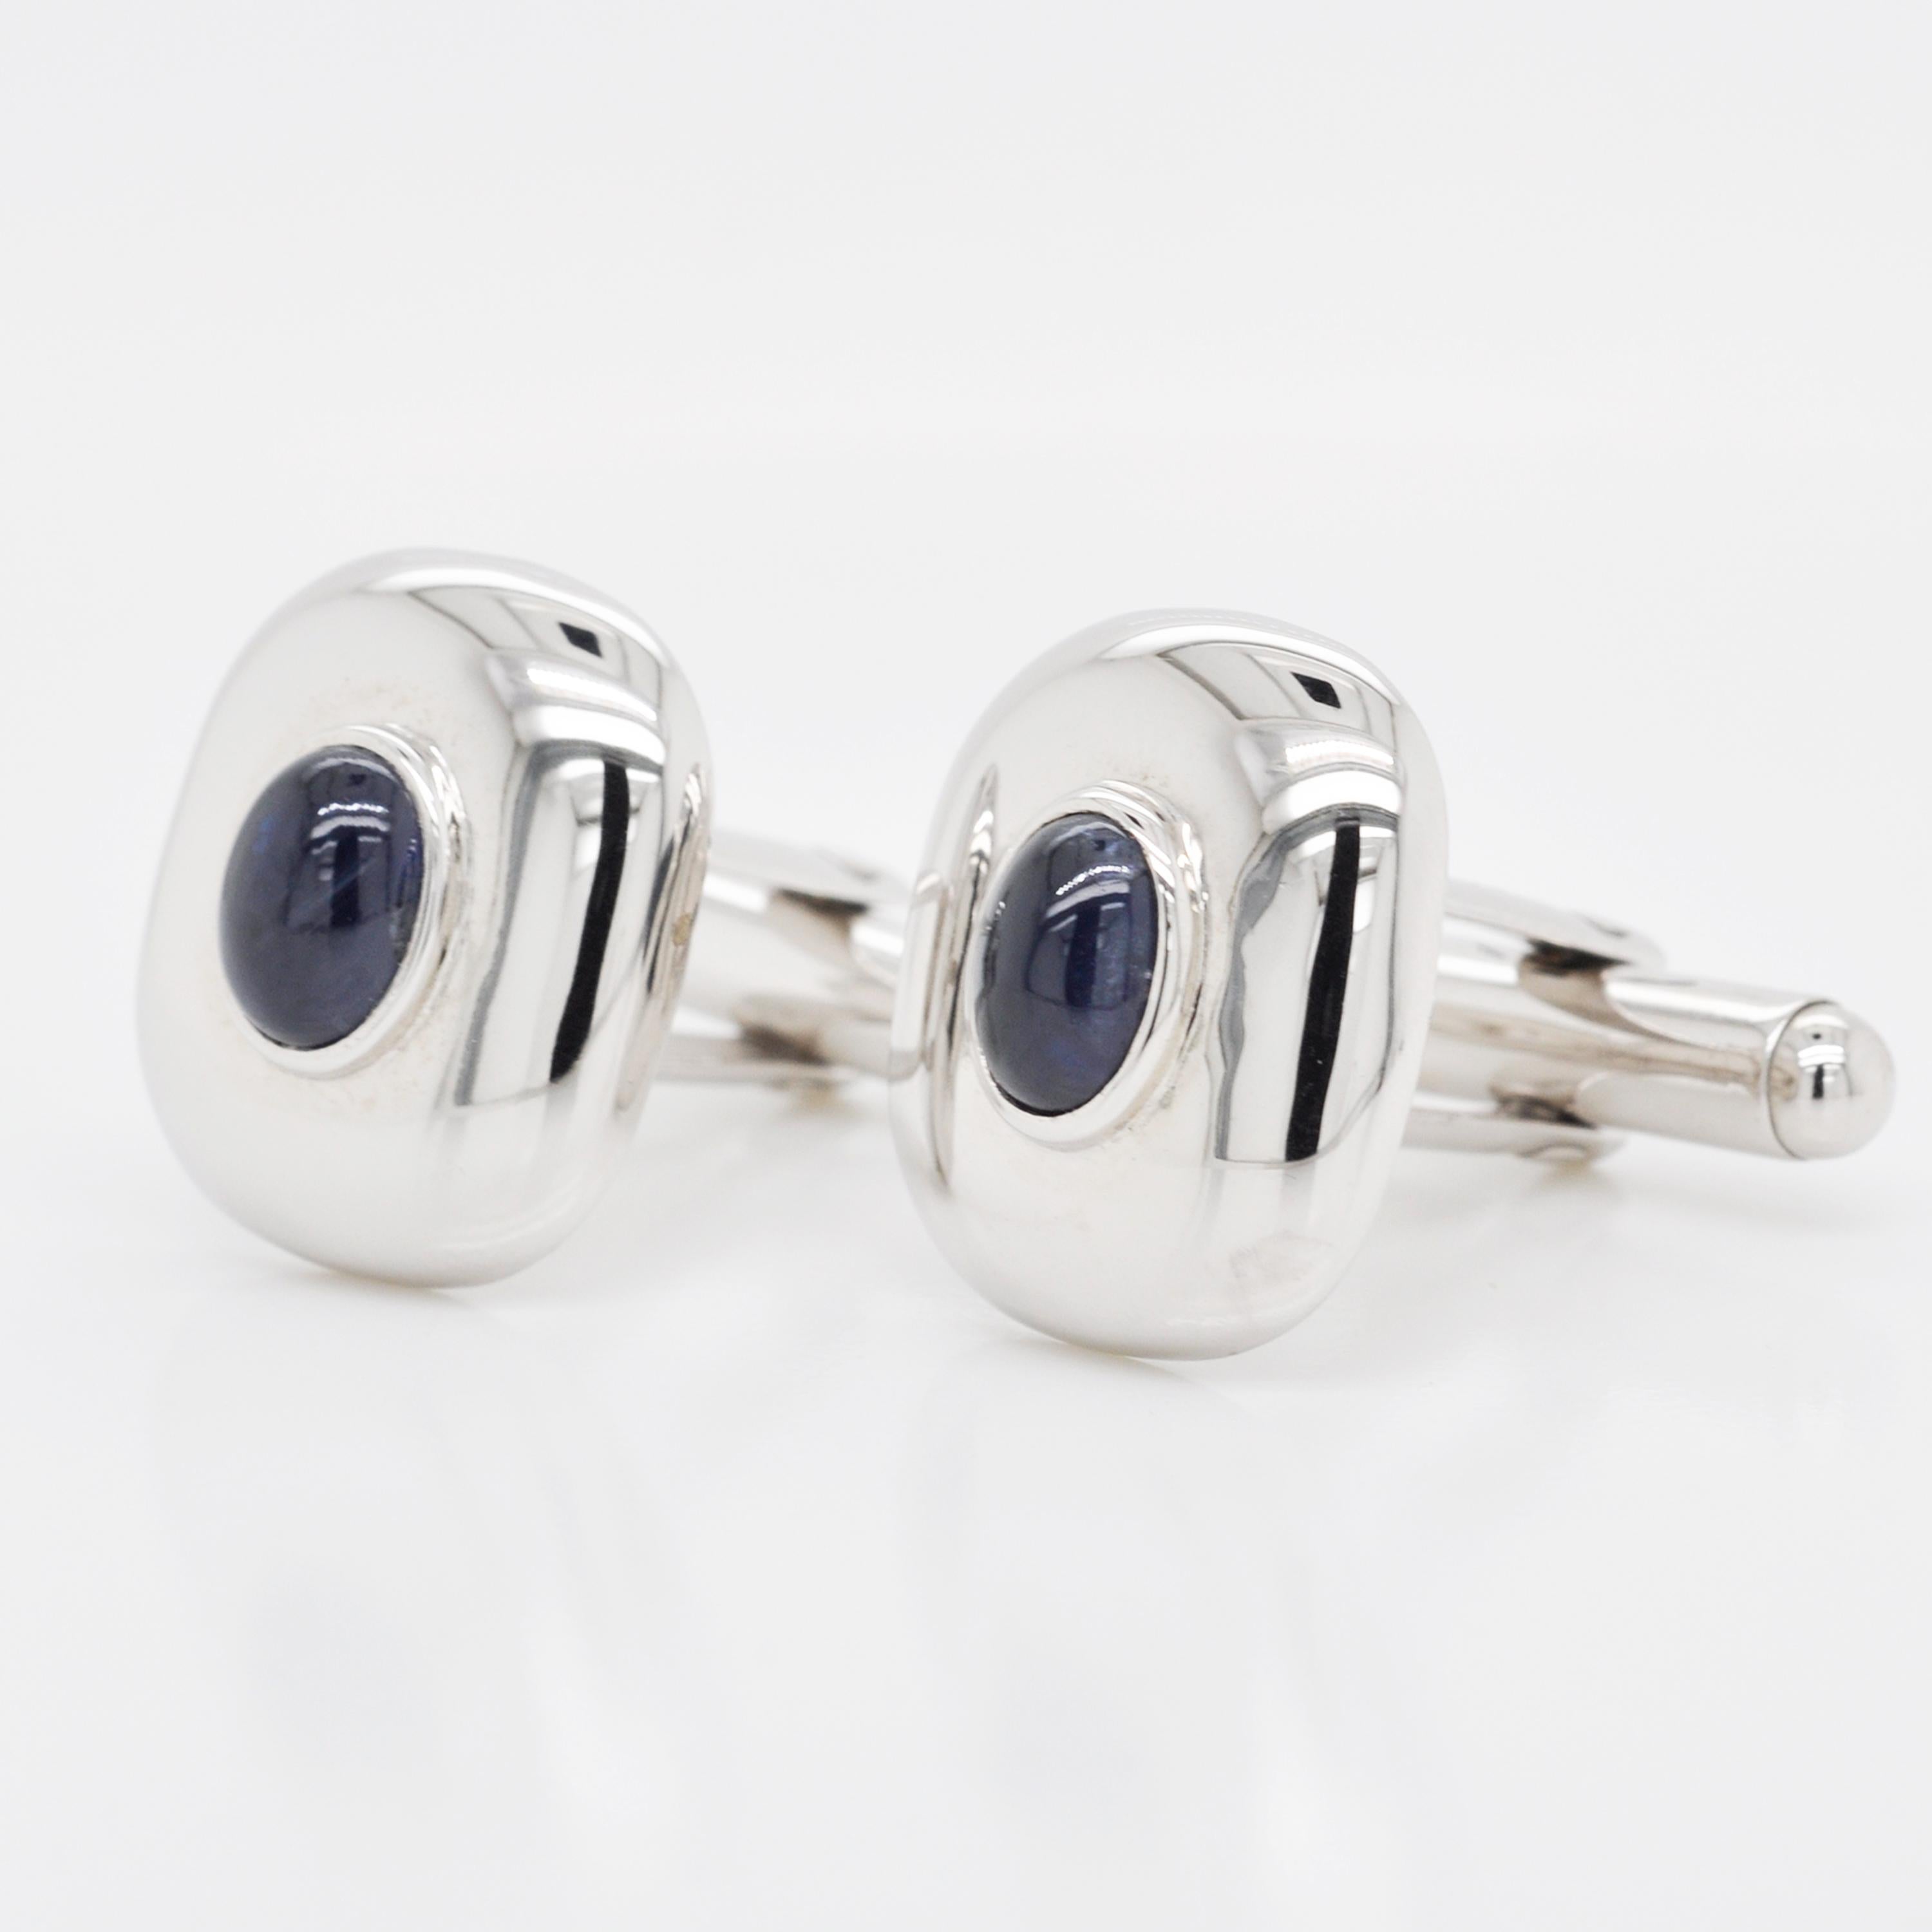 These cufflinks in 925 sterling silver are made in world class finish. Adding to the overall formal appeal is the blue sapphire cabochon at the centre of the antique shaped 925 Sterling Silver Cufflinks. It's perfectly balanced shape adds to the